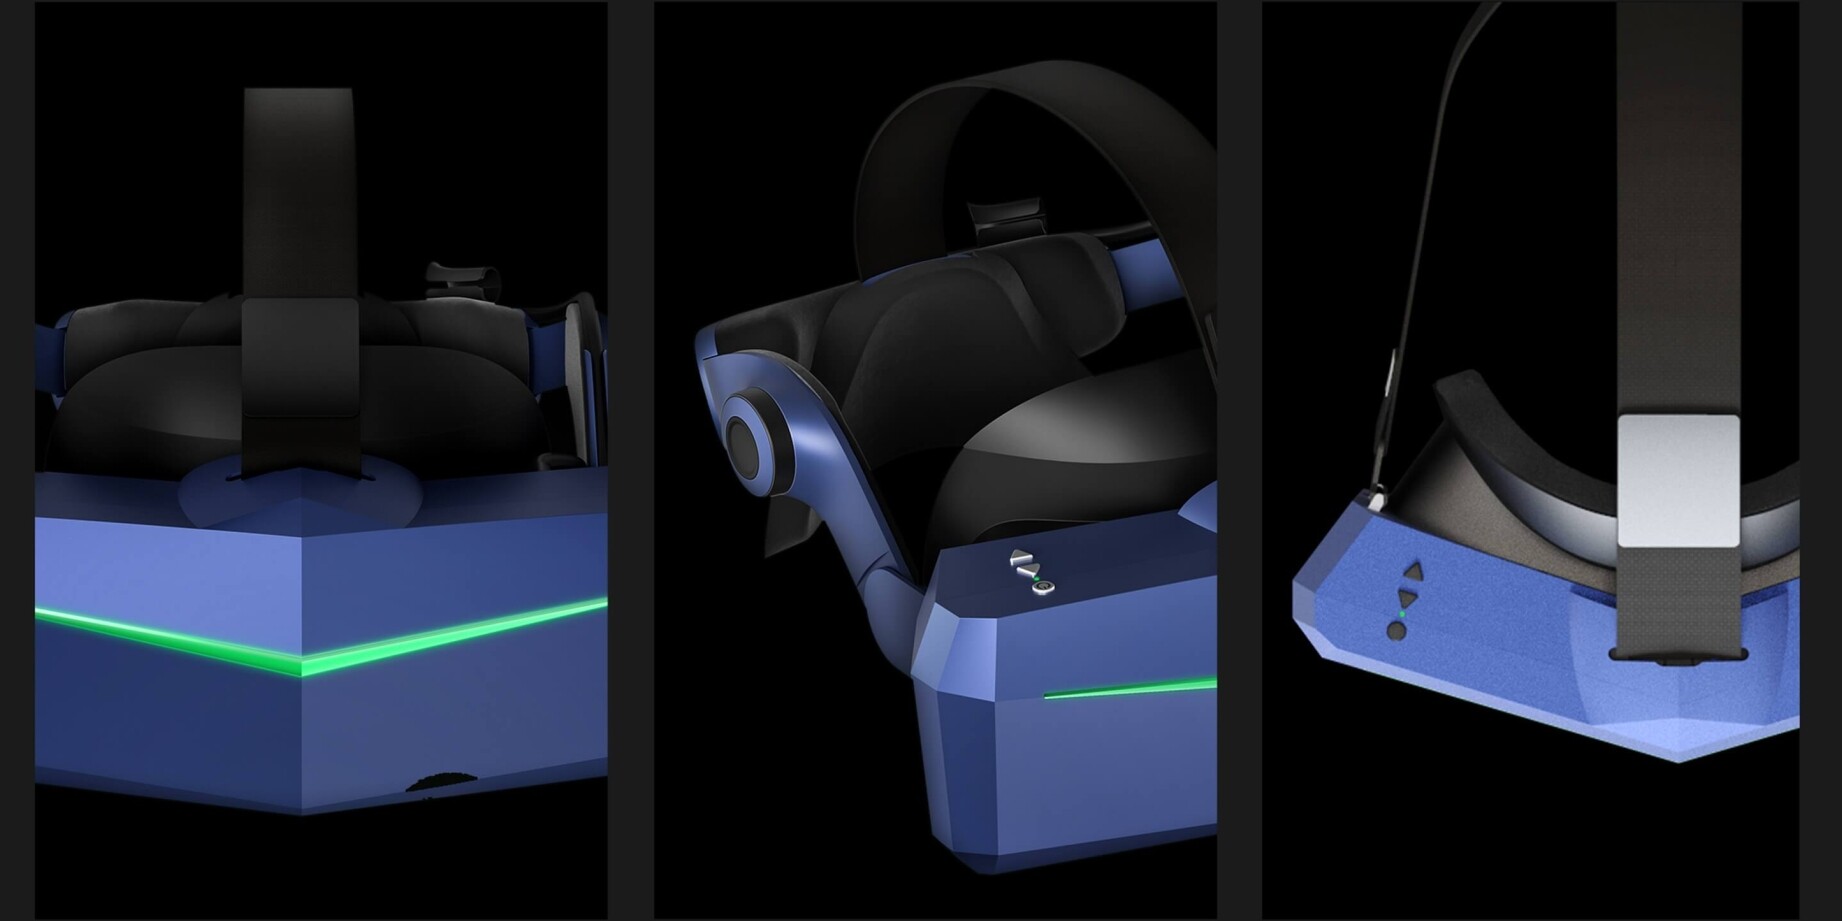 Pimax's new 180 Hz VR headset is now available